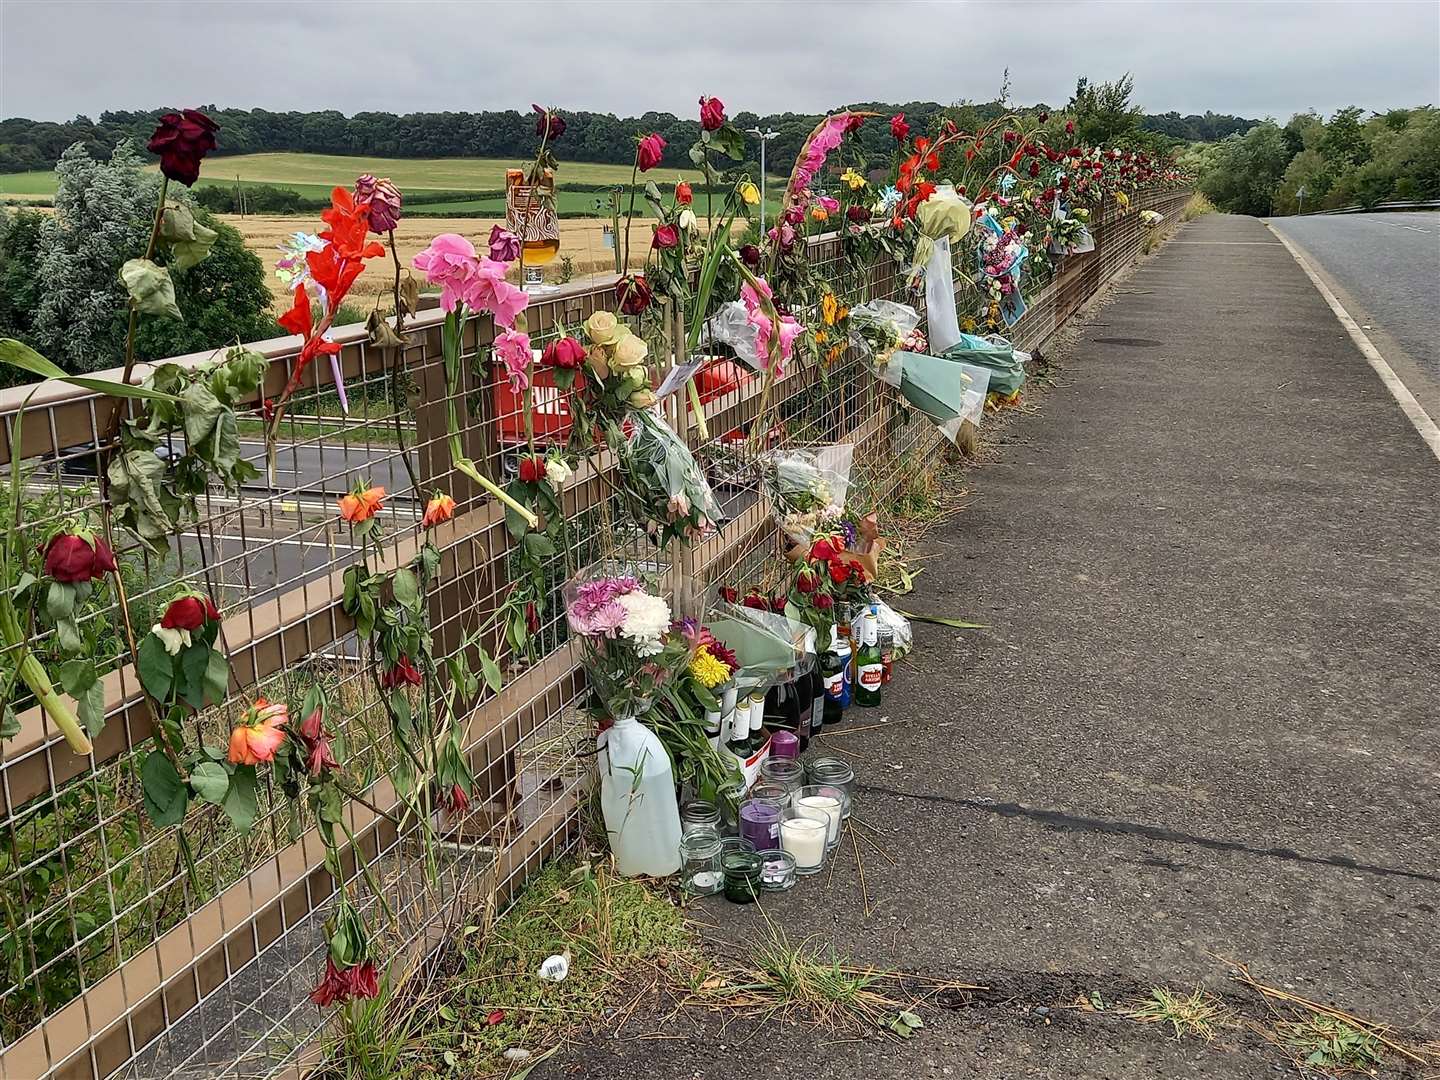 Floral tributes have been left on the bridge where Lee Harlow tragically lost his life